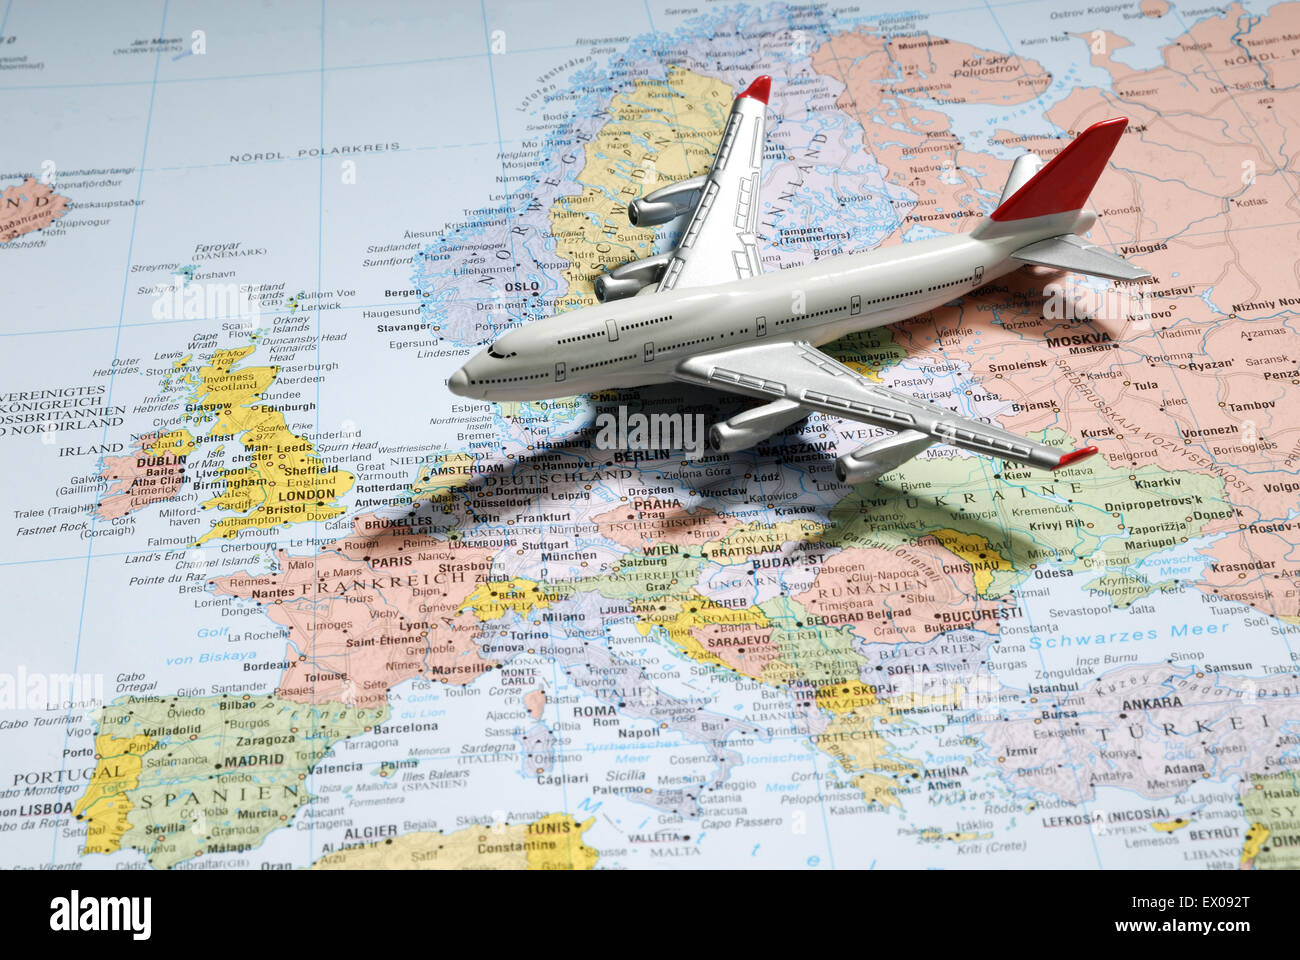 Model of a passenger aircraft on a map of Europe Stock Photo